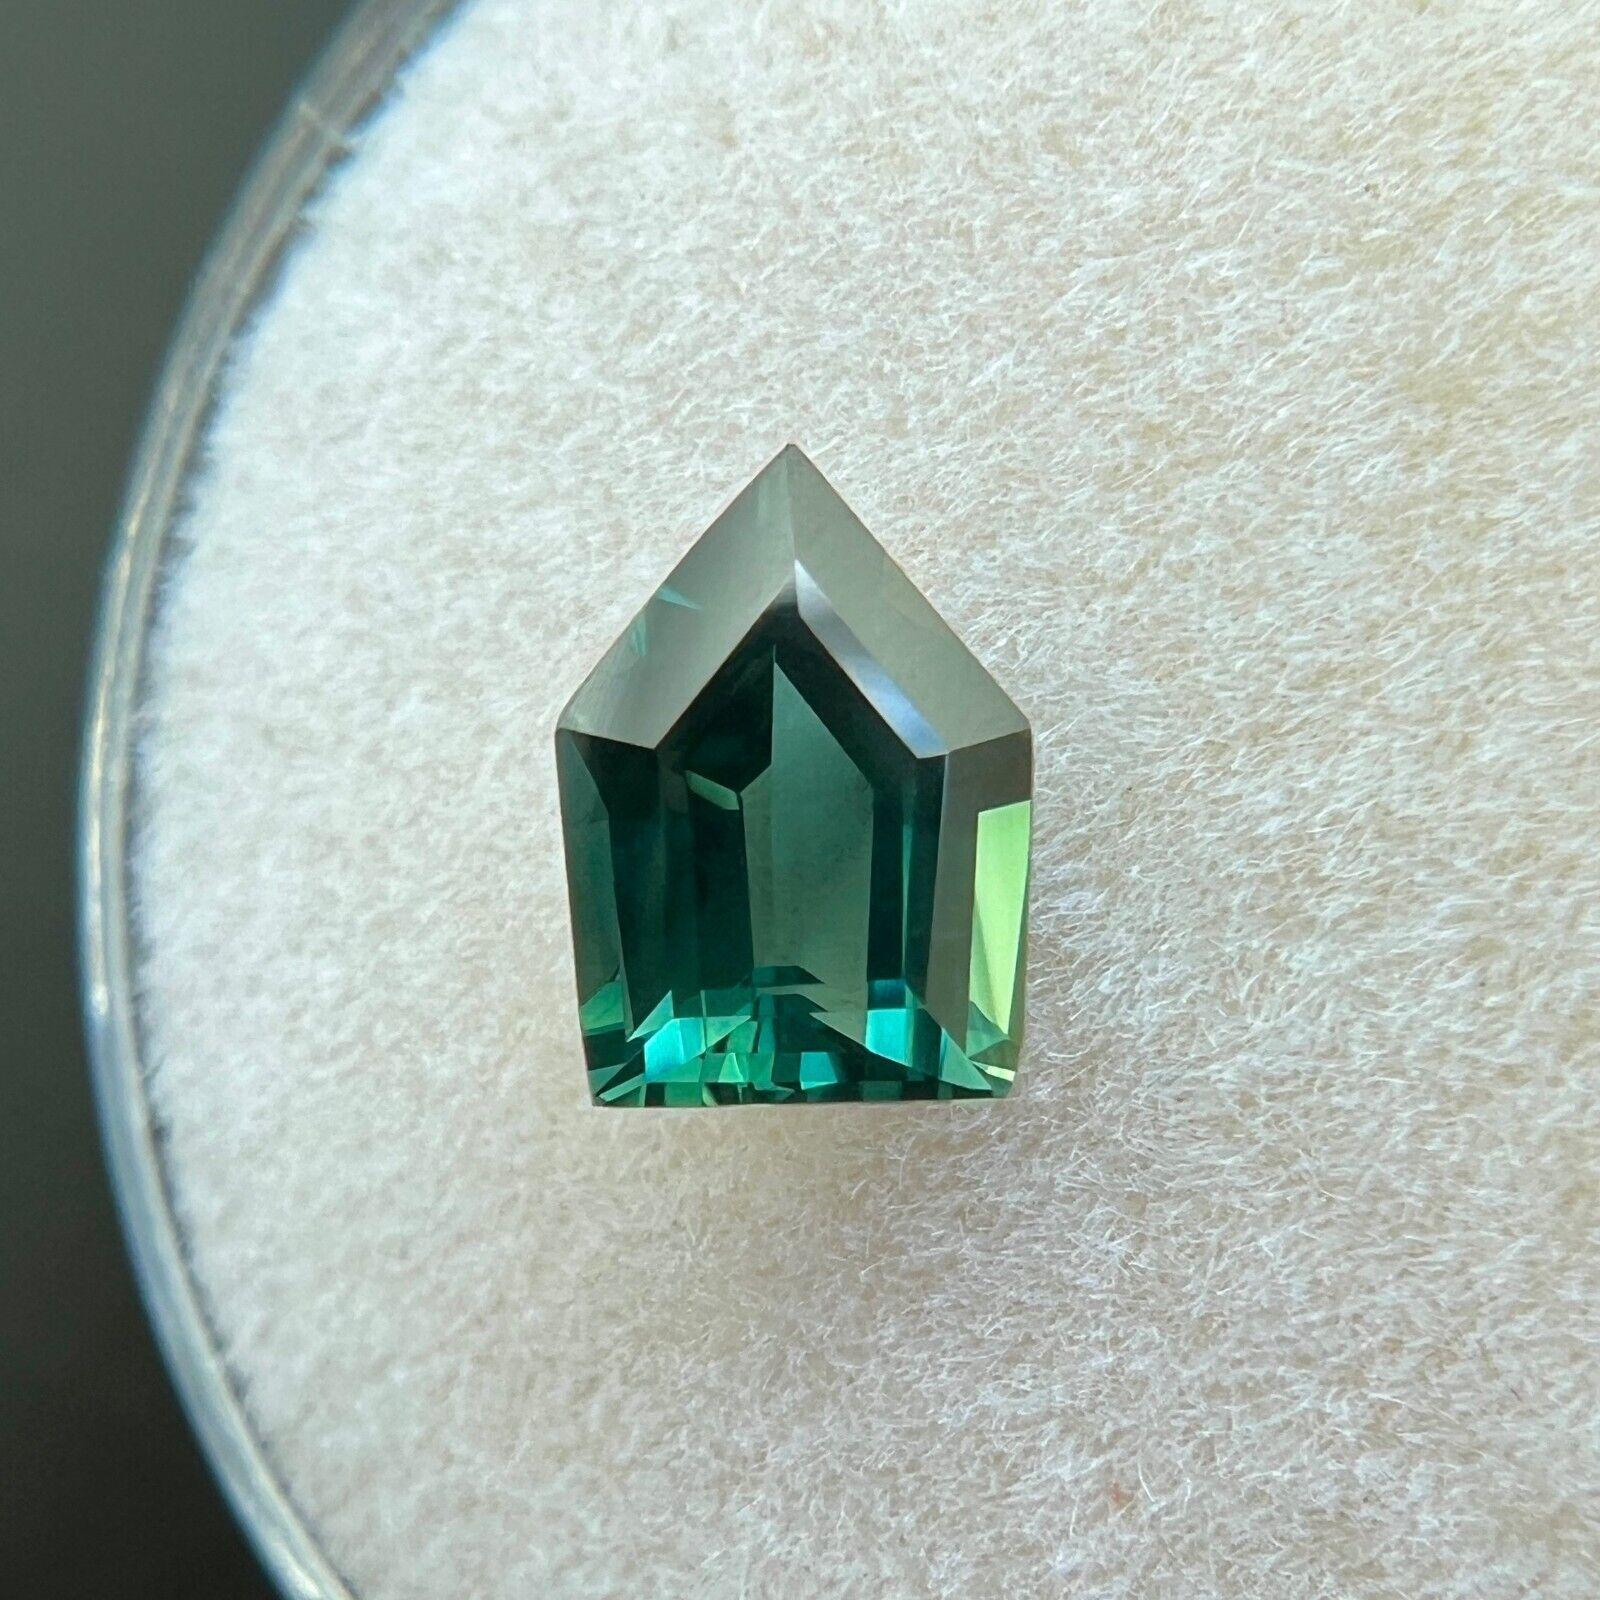 Unique Fancy Cut 1.06Ct Green Sapphire GRA Certified Unheated Gem

Natural GRA Certified Untreated Green Sapphire Gemstone.
1.06 Carat sapphire with a beautiful vivid green colour.
Fully certified by GRA confirming stone as natural and untreated,